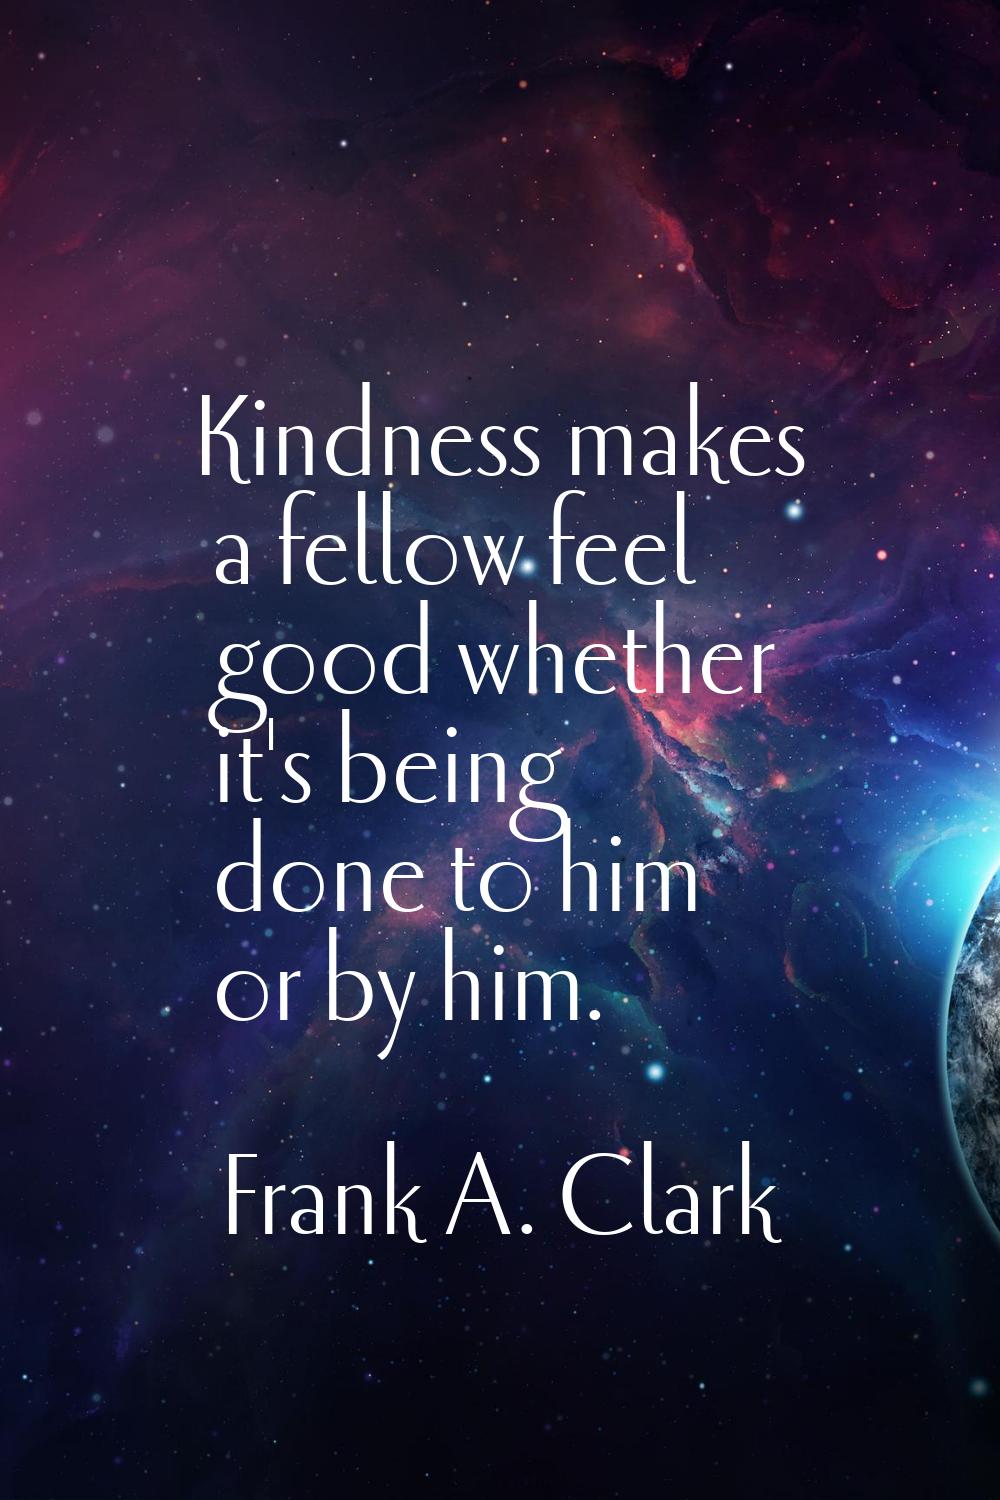 Kindness makes a fellow feel good whether it's being done to him or by him.